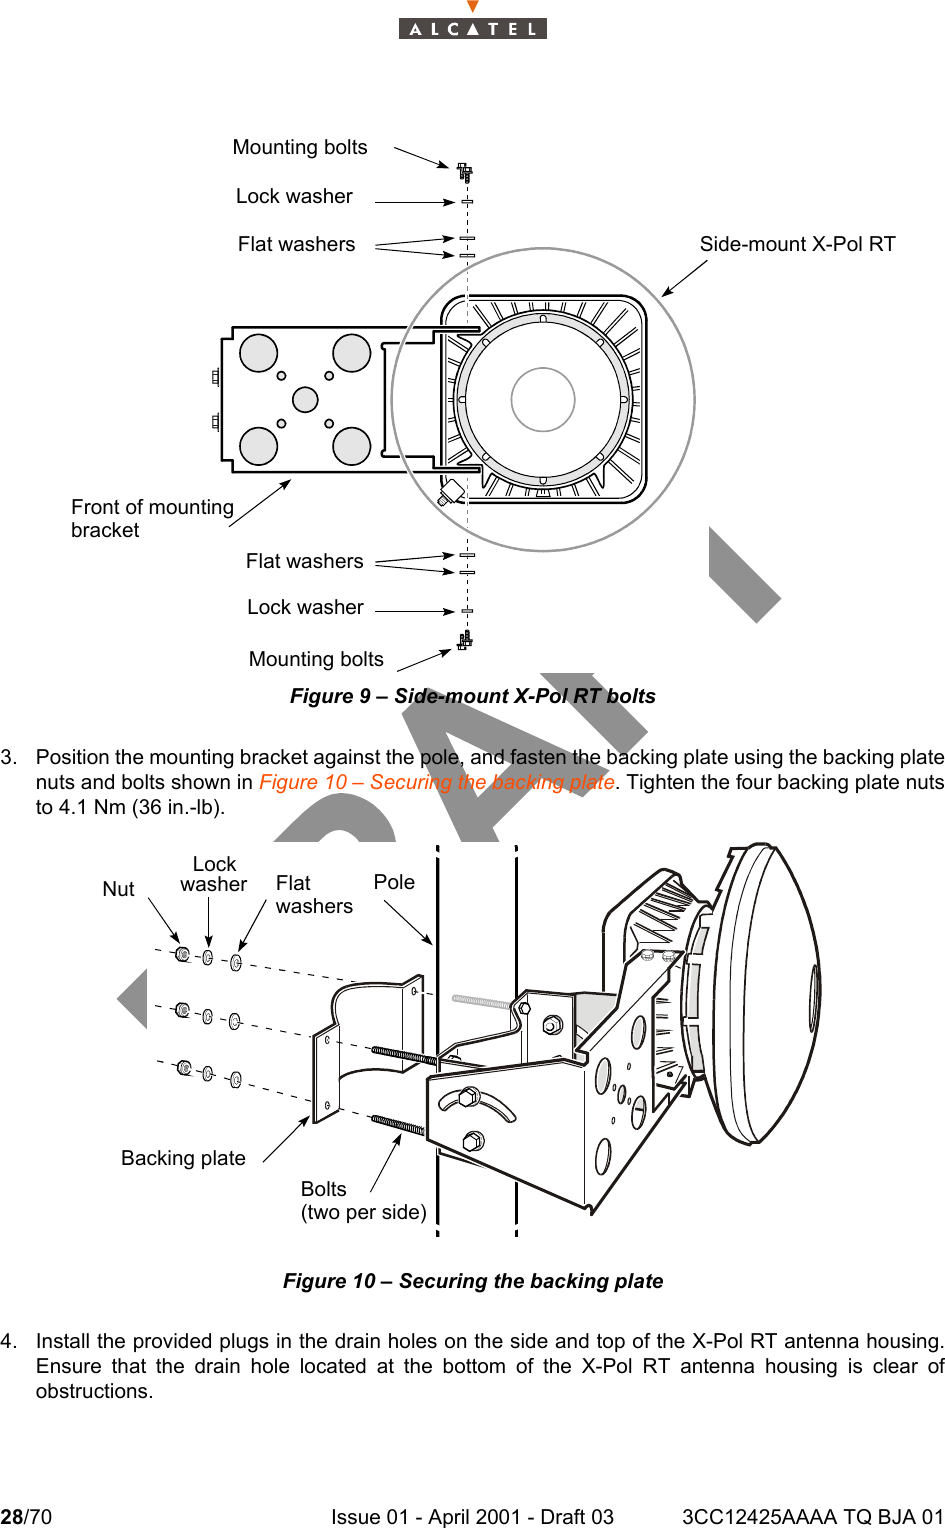 28/70 Issue 01 - April 2001 - Draft 03 3CC12425AAAA TQ BJA 0134Figure 9 – Side-mount X-Pol RT bolts3. Position the mounting bracket against the pole, and fasten the backing plate using the backing platenuts and bolts shown in Figure 10 – Securing the backing plate. Tighten the four backing plate nutsto 4.1 Nm (36 in.-lb).Figure 10 – Securing the backing plate4. Install the provided plugs in the drain holes on the side and top of the X-Pol RT antenna housing.Ensure that the drain hole located at the bottom of the X-Pol RT antenna housing is clear ofobstructions.Side-mount X-Pol RTMounting boltsLock washerFlat washersFront of mountingbracketMounting boltsLock washerFlat washersNutLockwasher FlatwashersPoleBacking plateBolts(two per side)